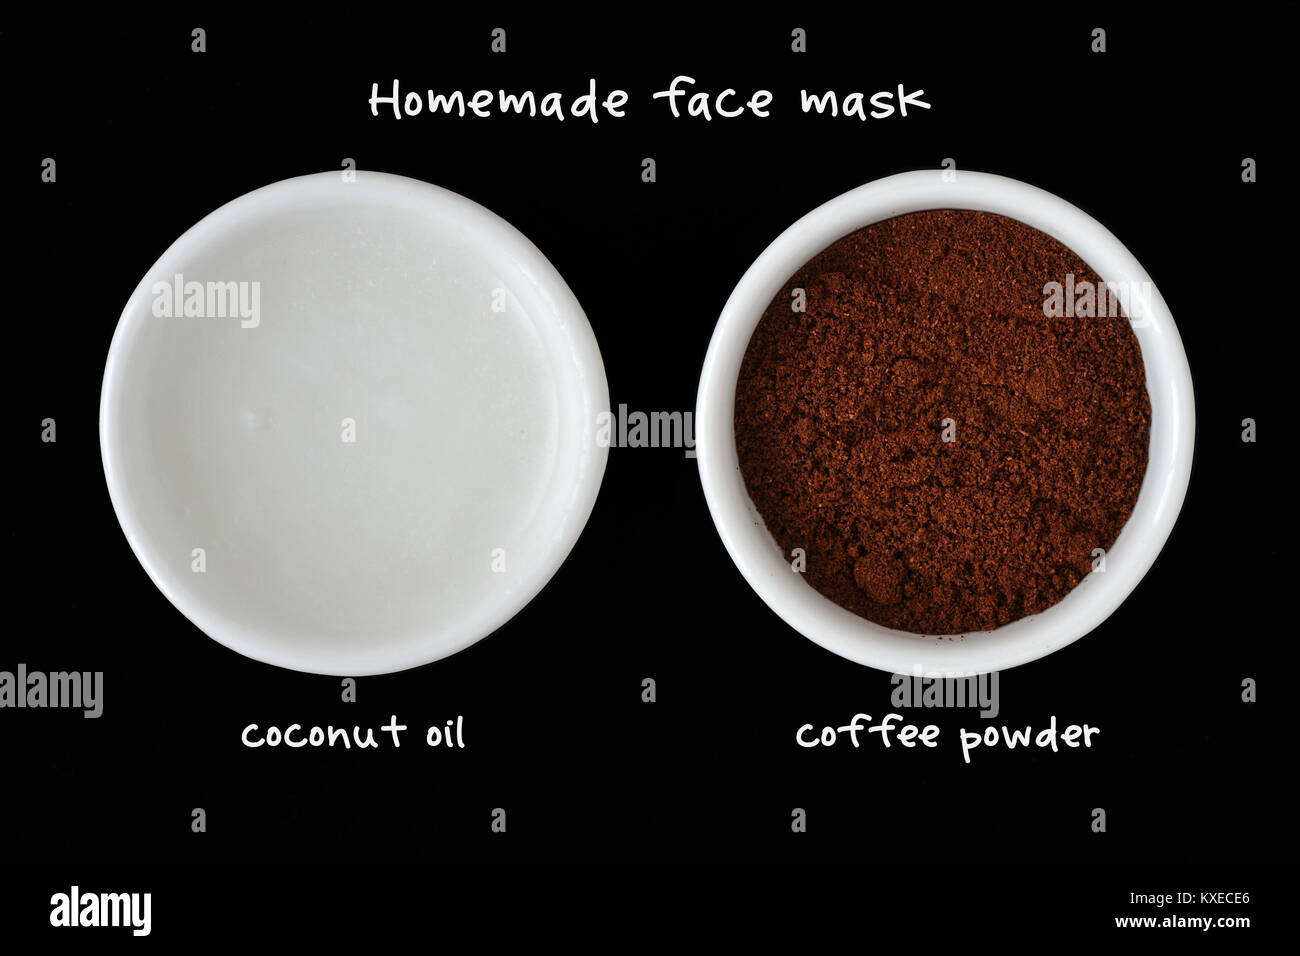 Homemade face mask made out of coconut oil and coffee powder - Black  background Stock Photo - Alamy